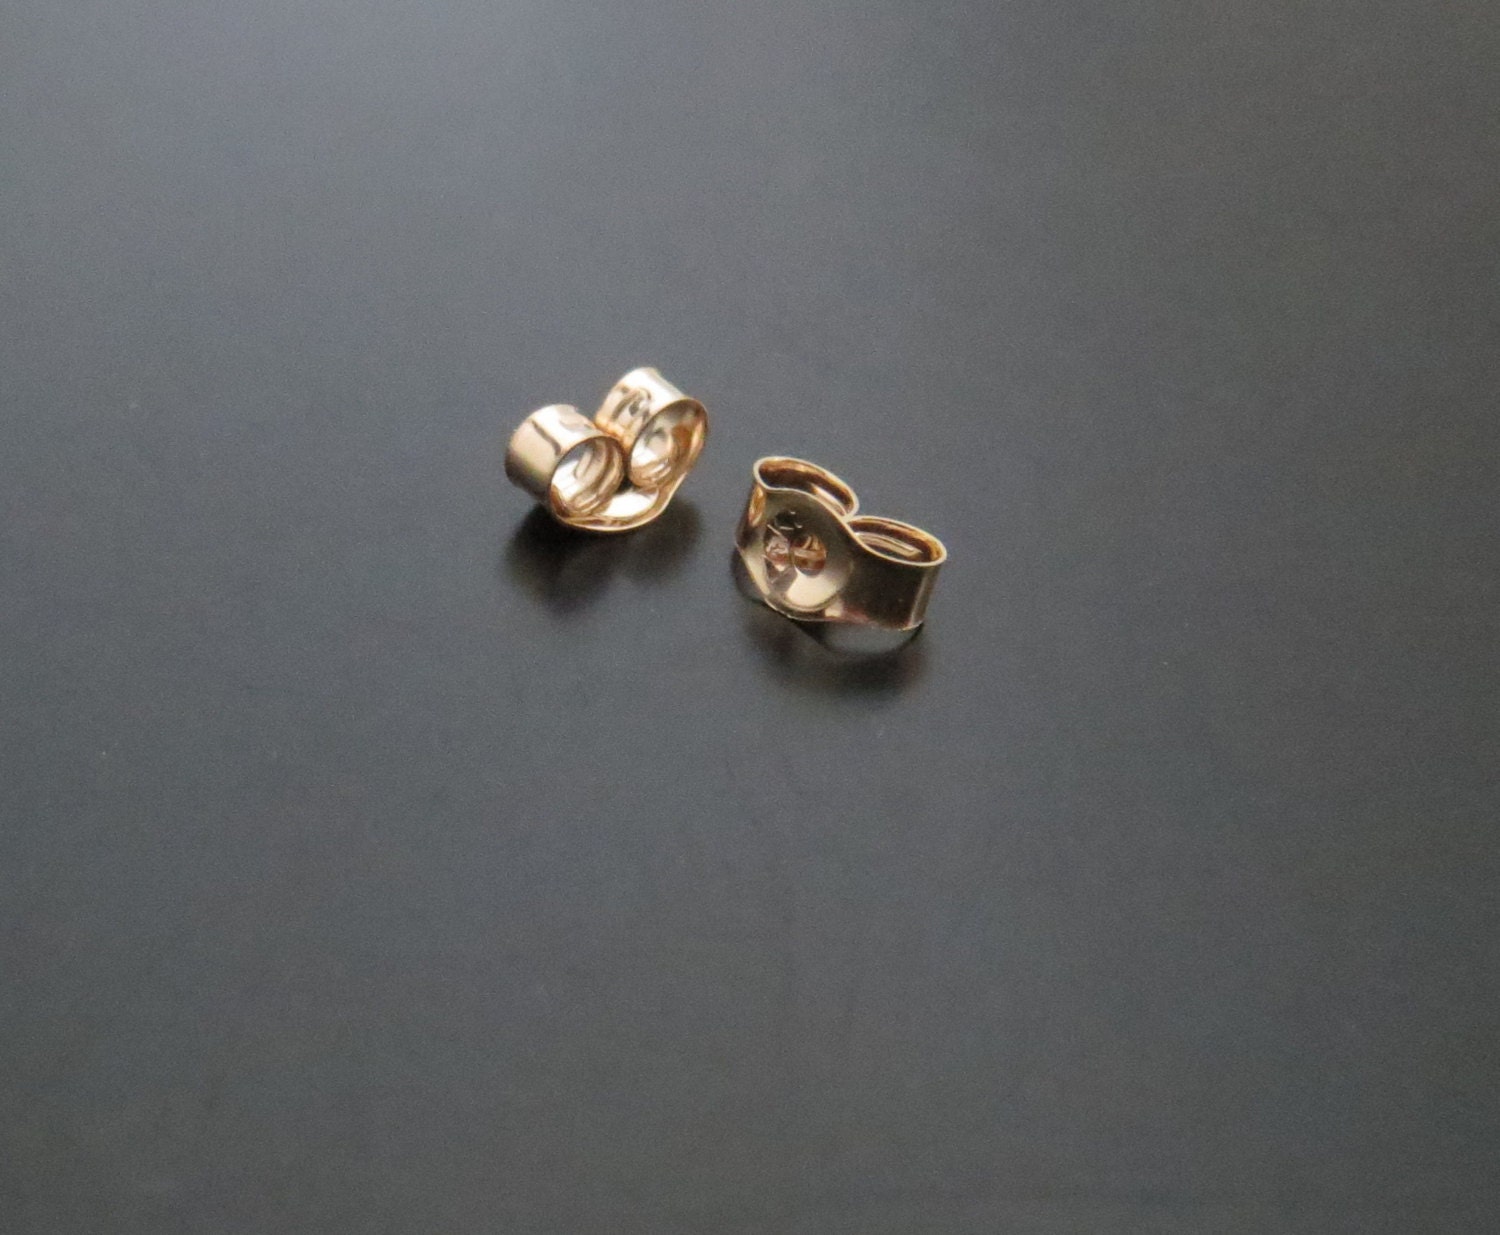 Tiny 14k Solid Gold Ear Nuts / Gold Earring Backs for Thin Post Stud  Earrings 24 or 22 Gauge Posts, Sold Individually, Made in the USA 